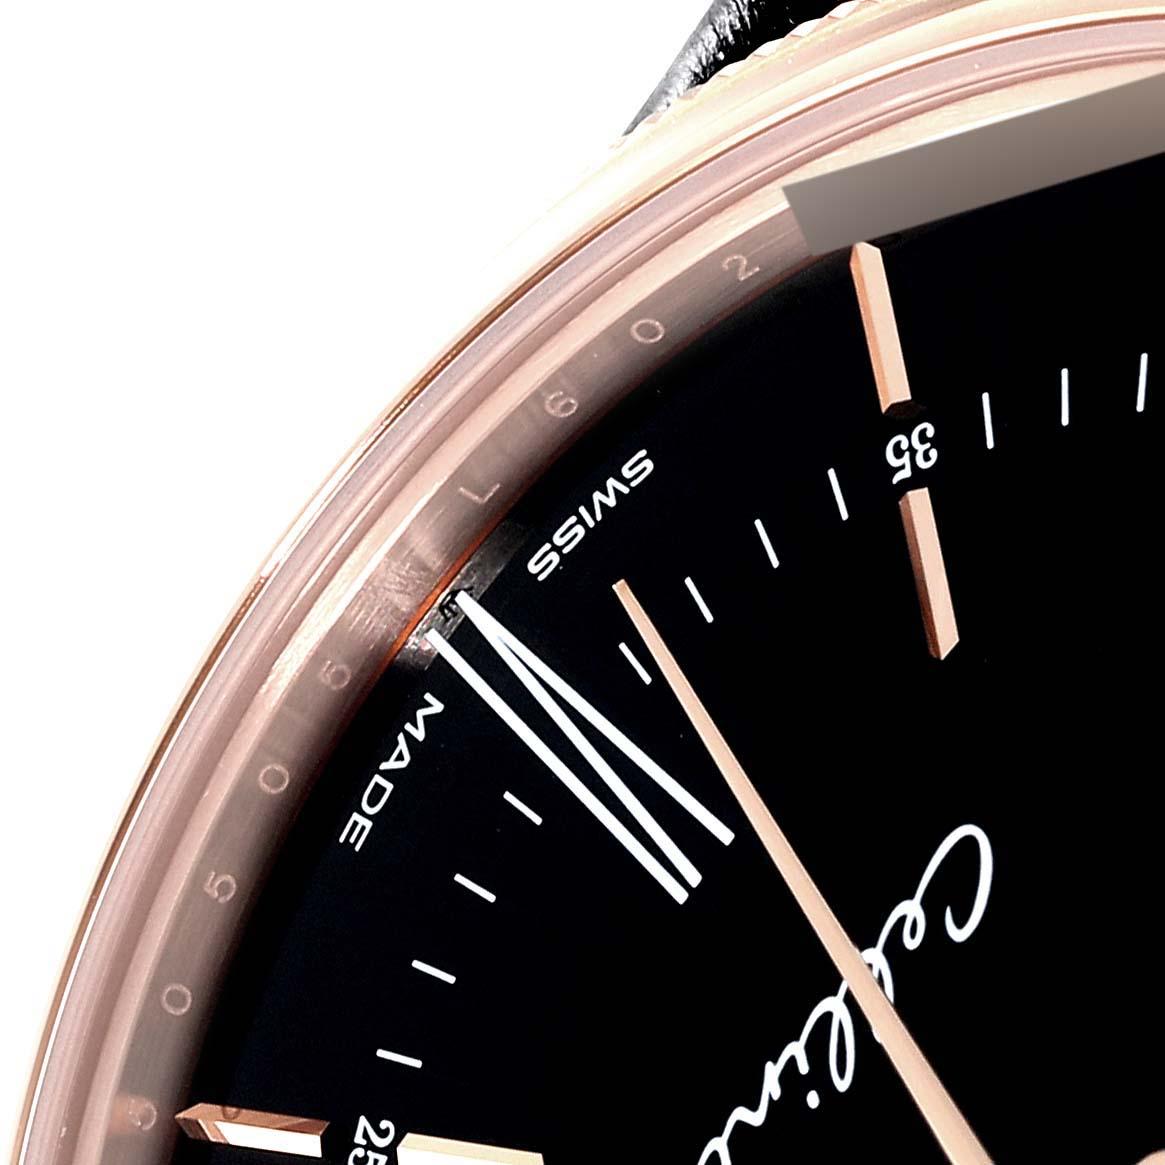 Rolex Cellini Time Rose Gold Black Dial Mens Watch 50505 Box Card 2